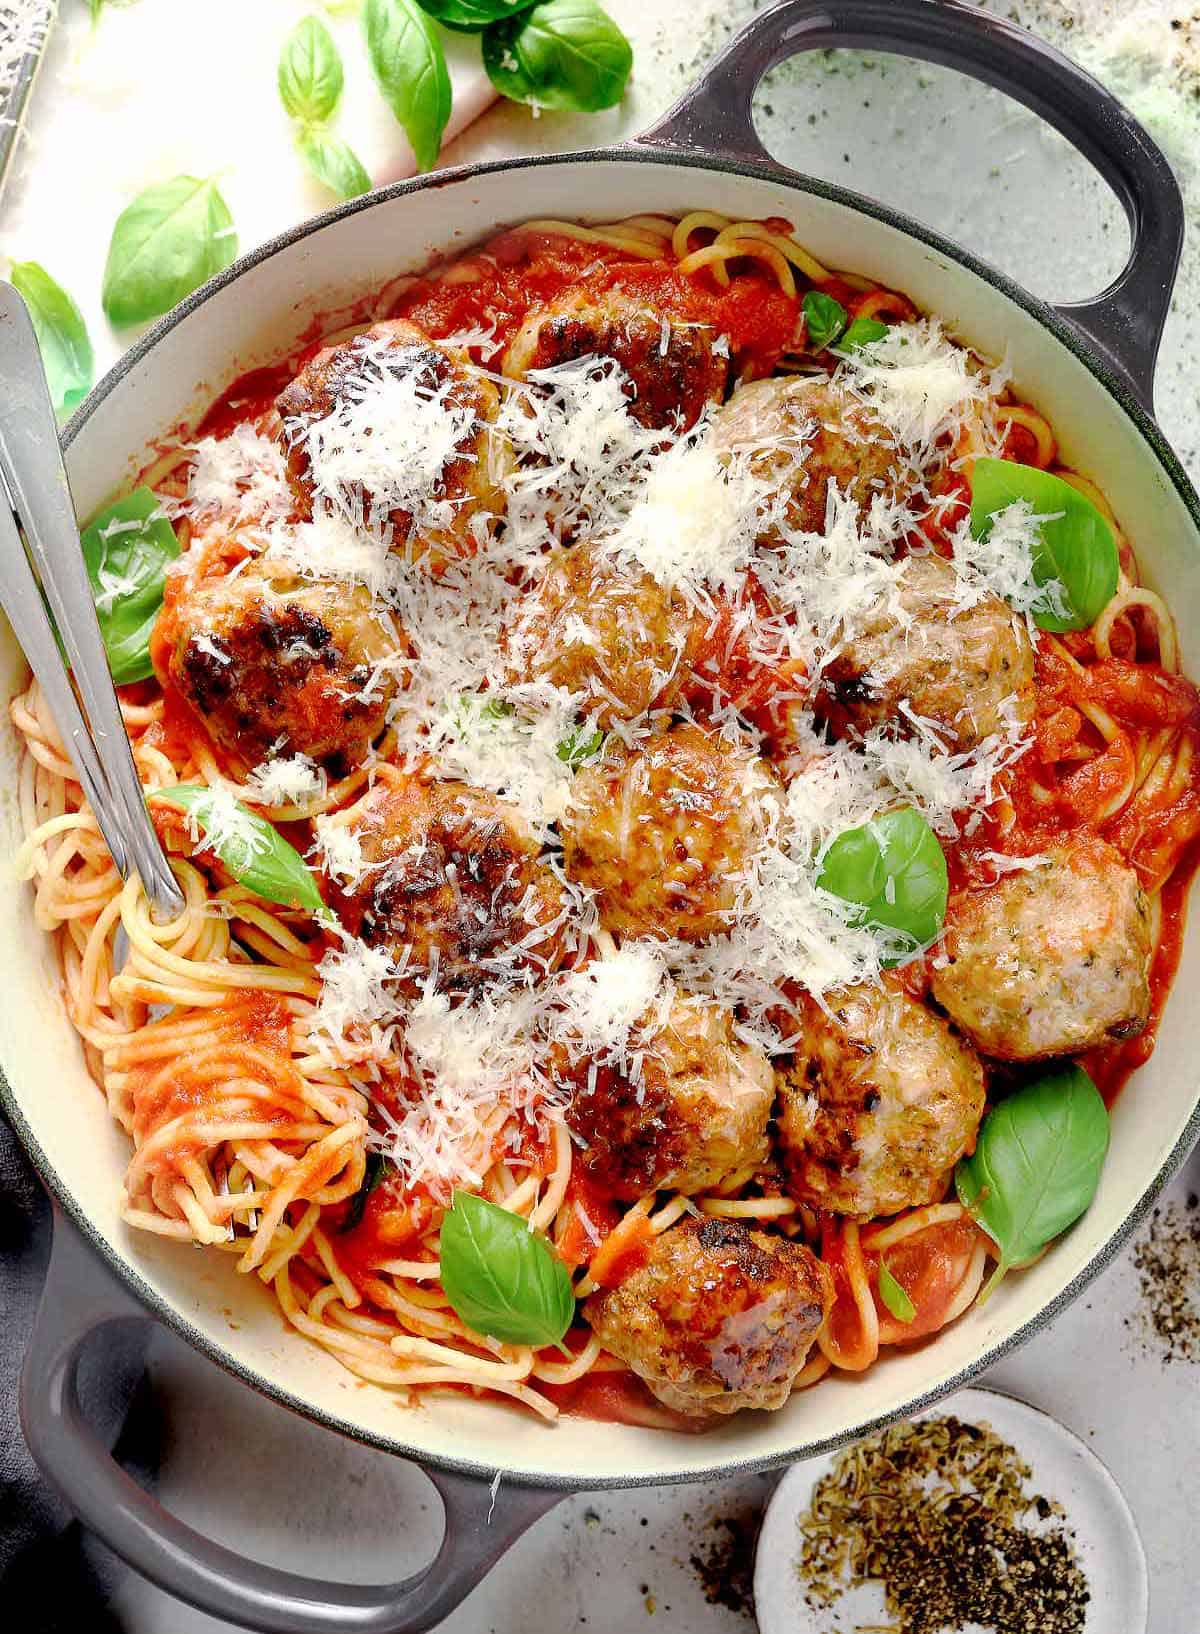 Can You Freeze Spaghetti and Meatballs?